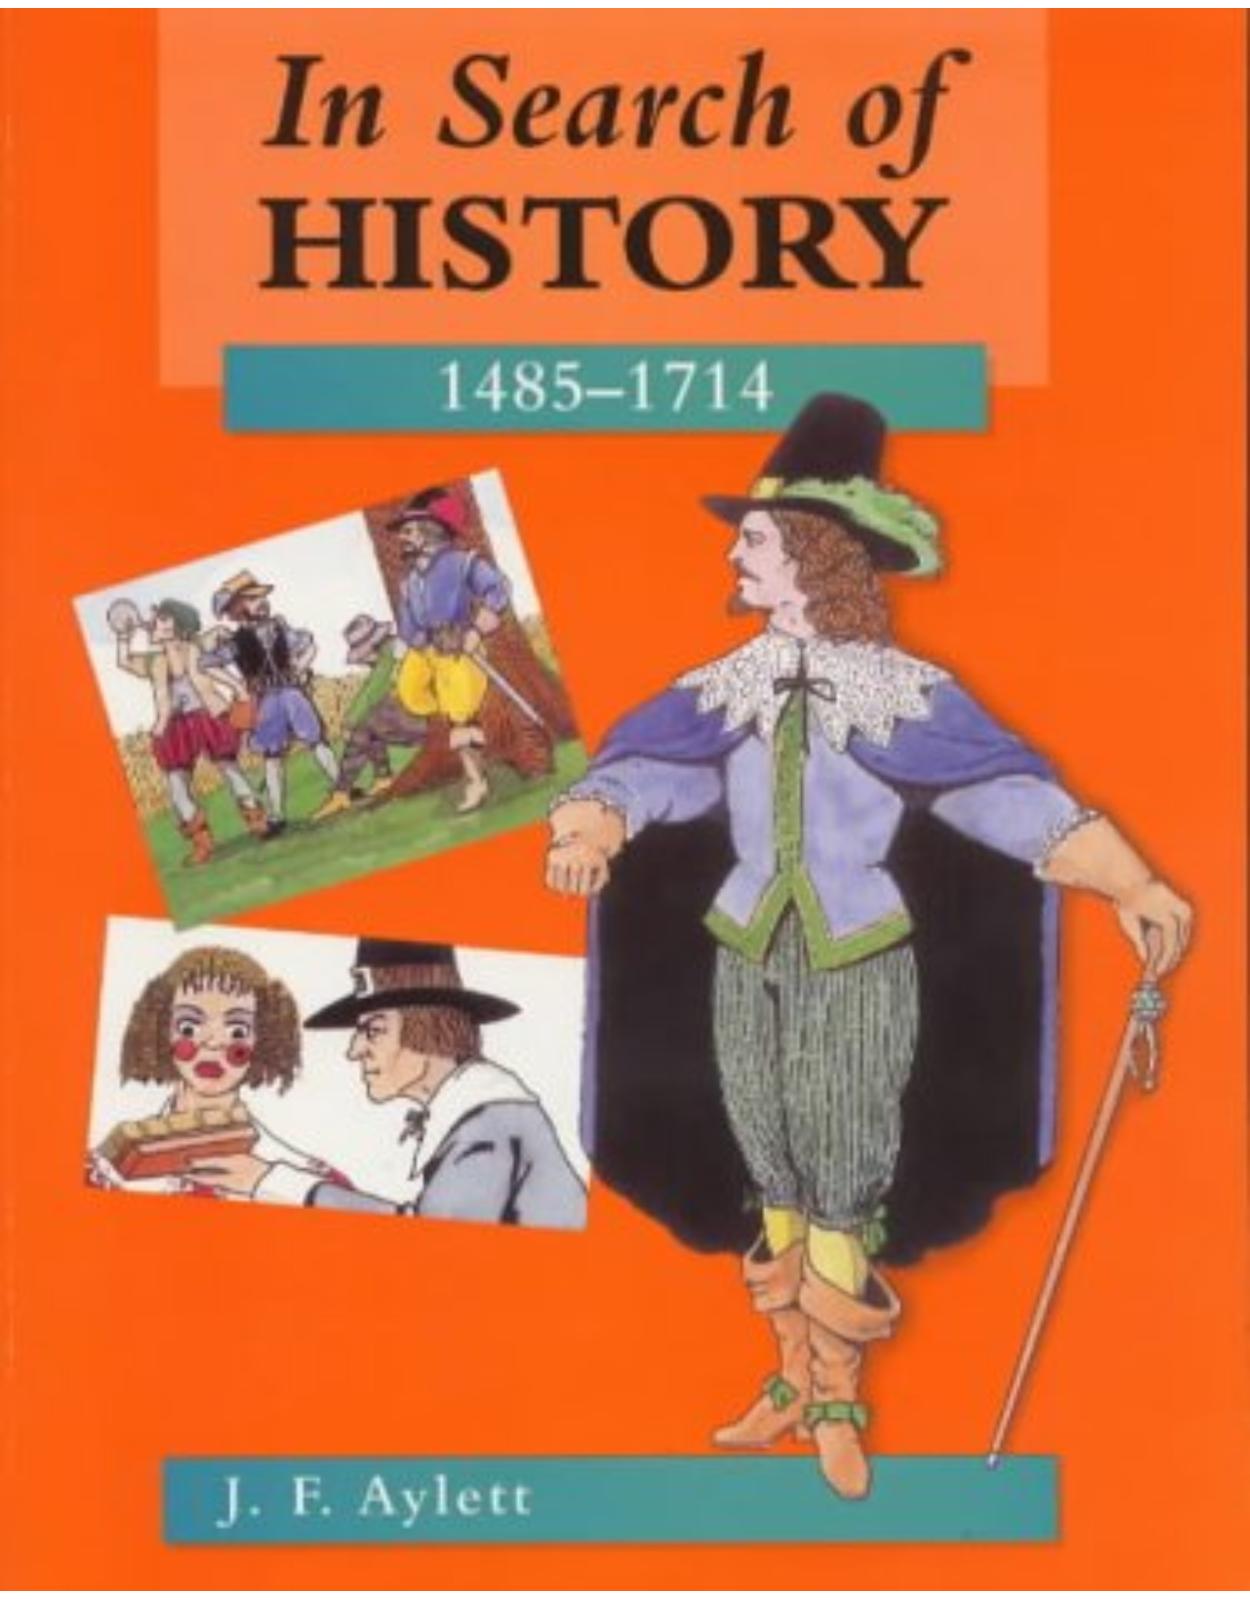 In Search of History: 1485 - 1714